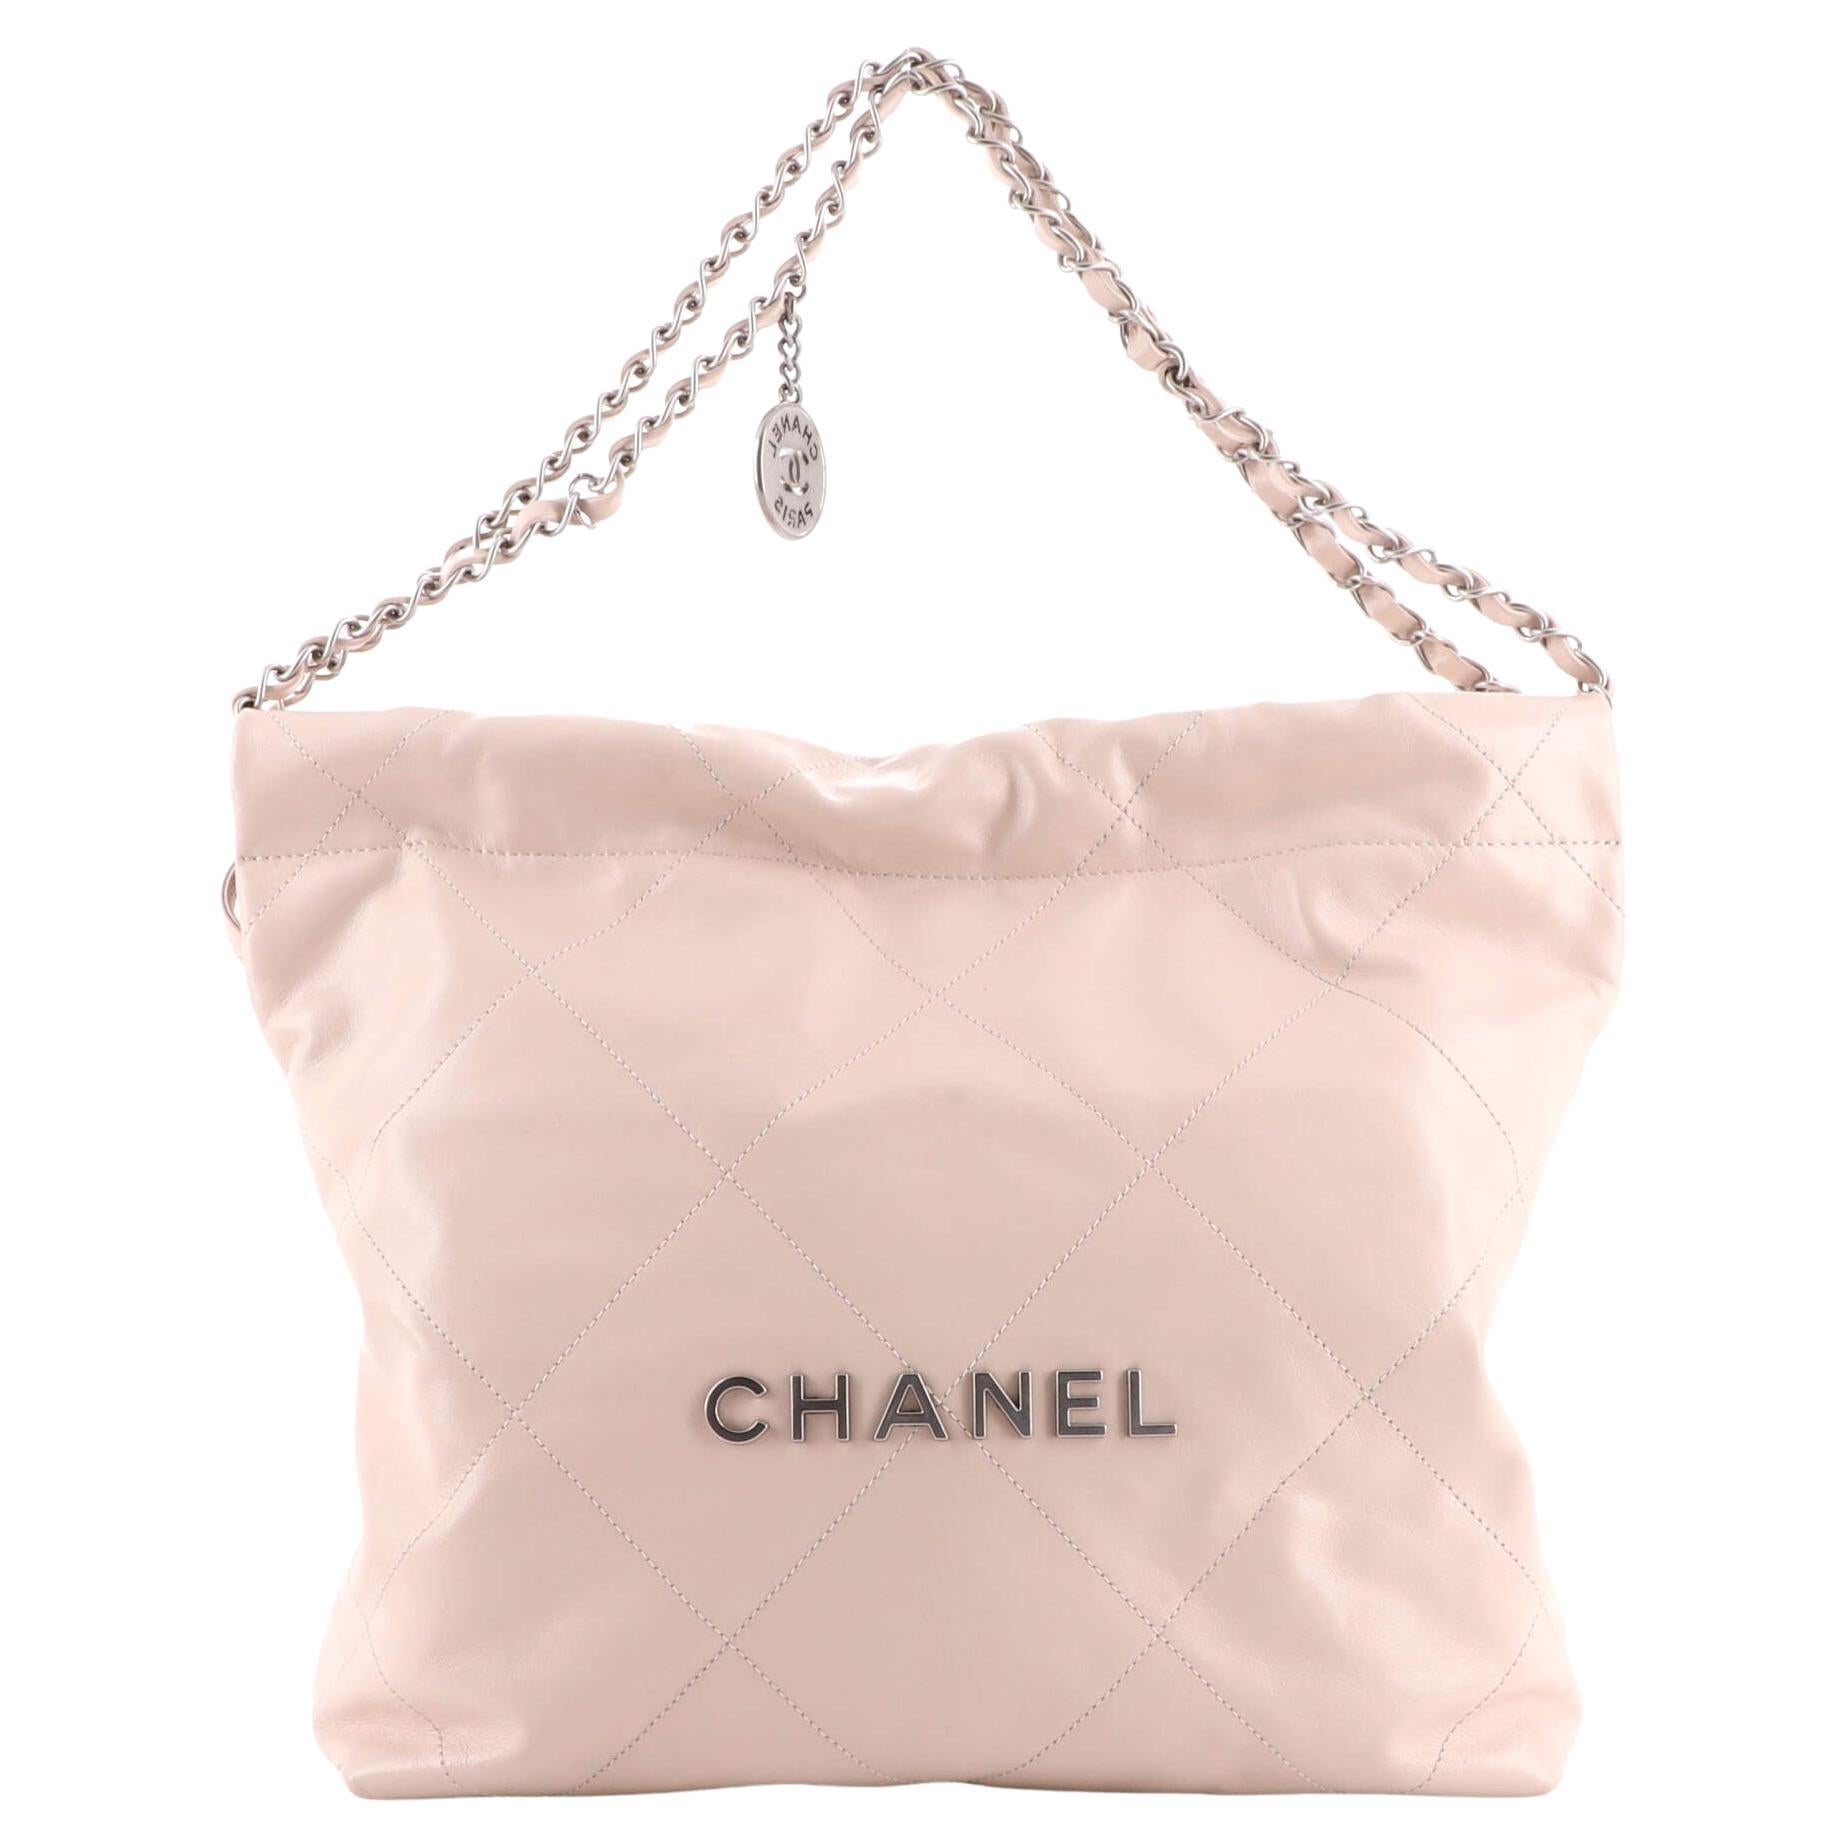 Chanel Calfskin Small Hobo Bag with Chain Charm AS2542 Beige 2021